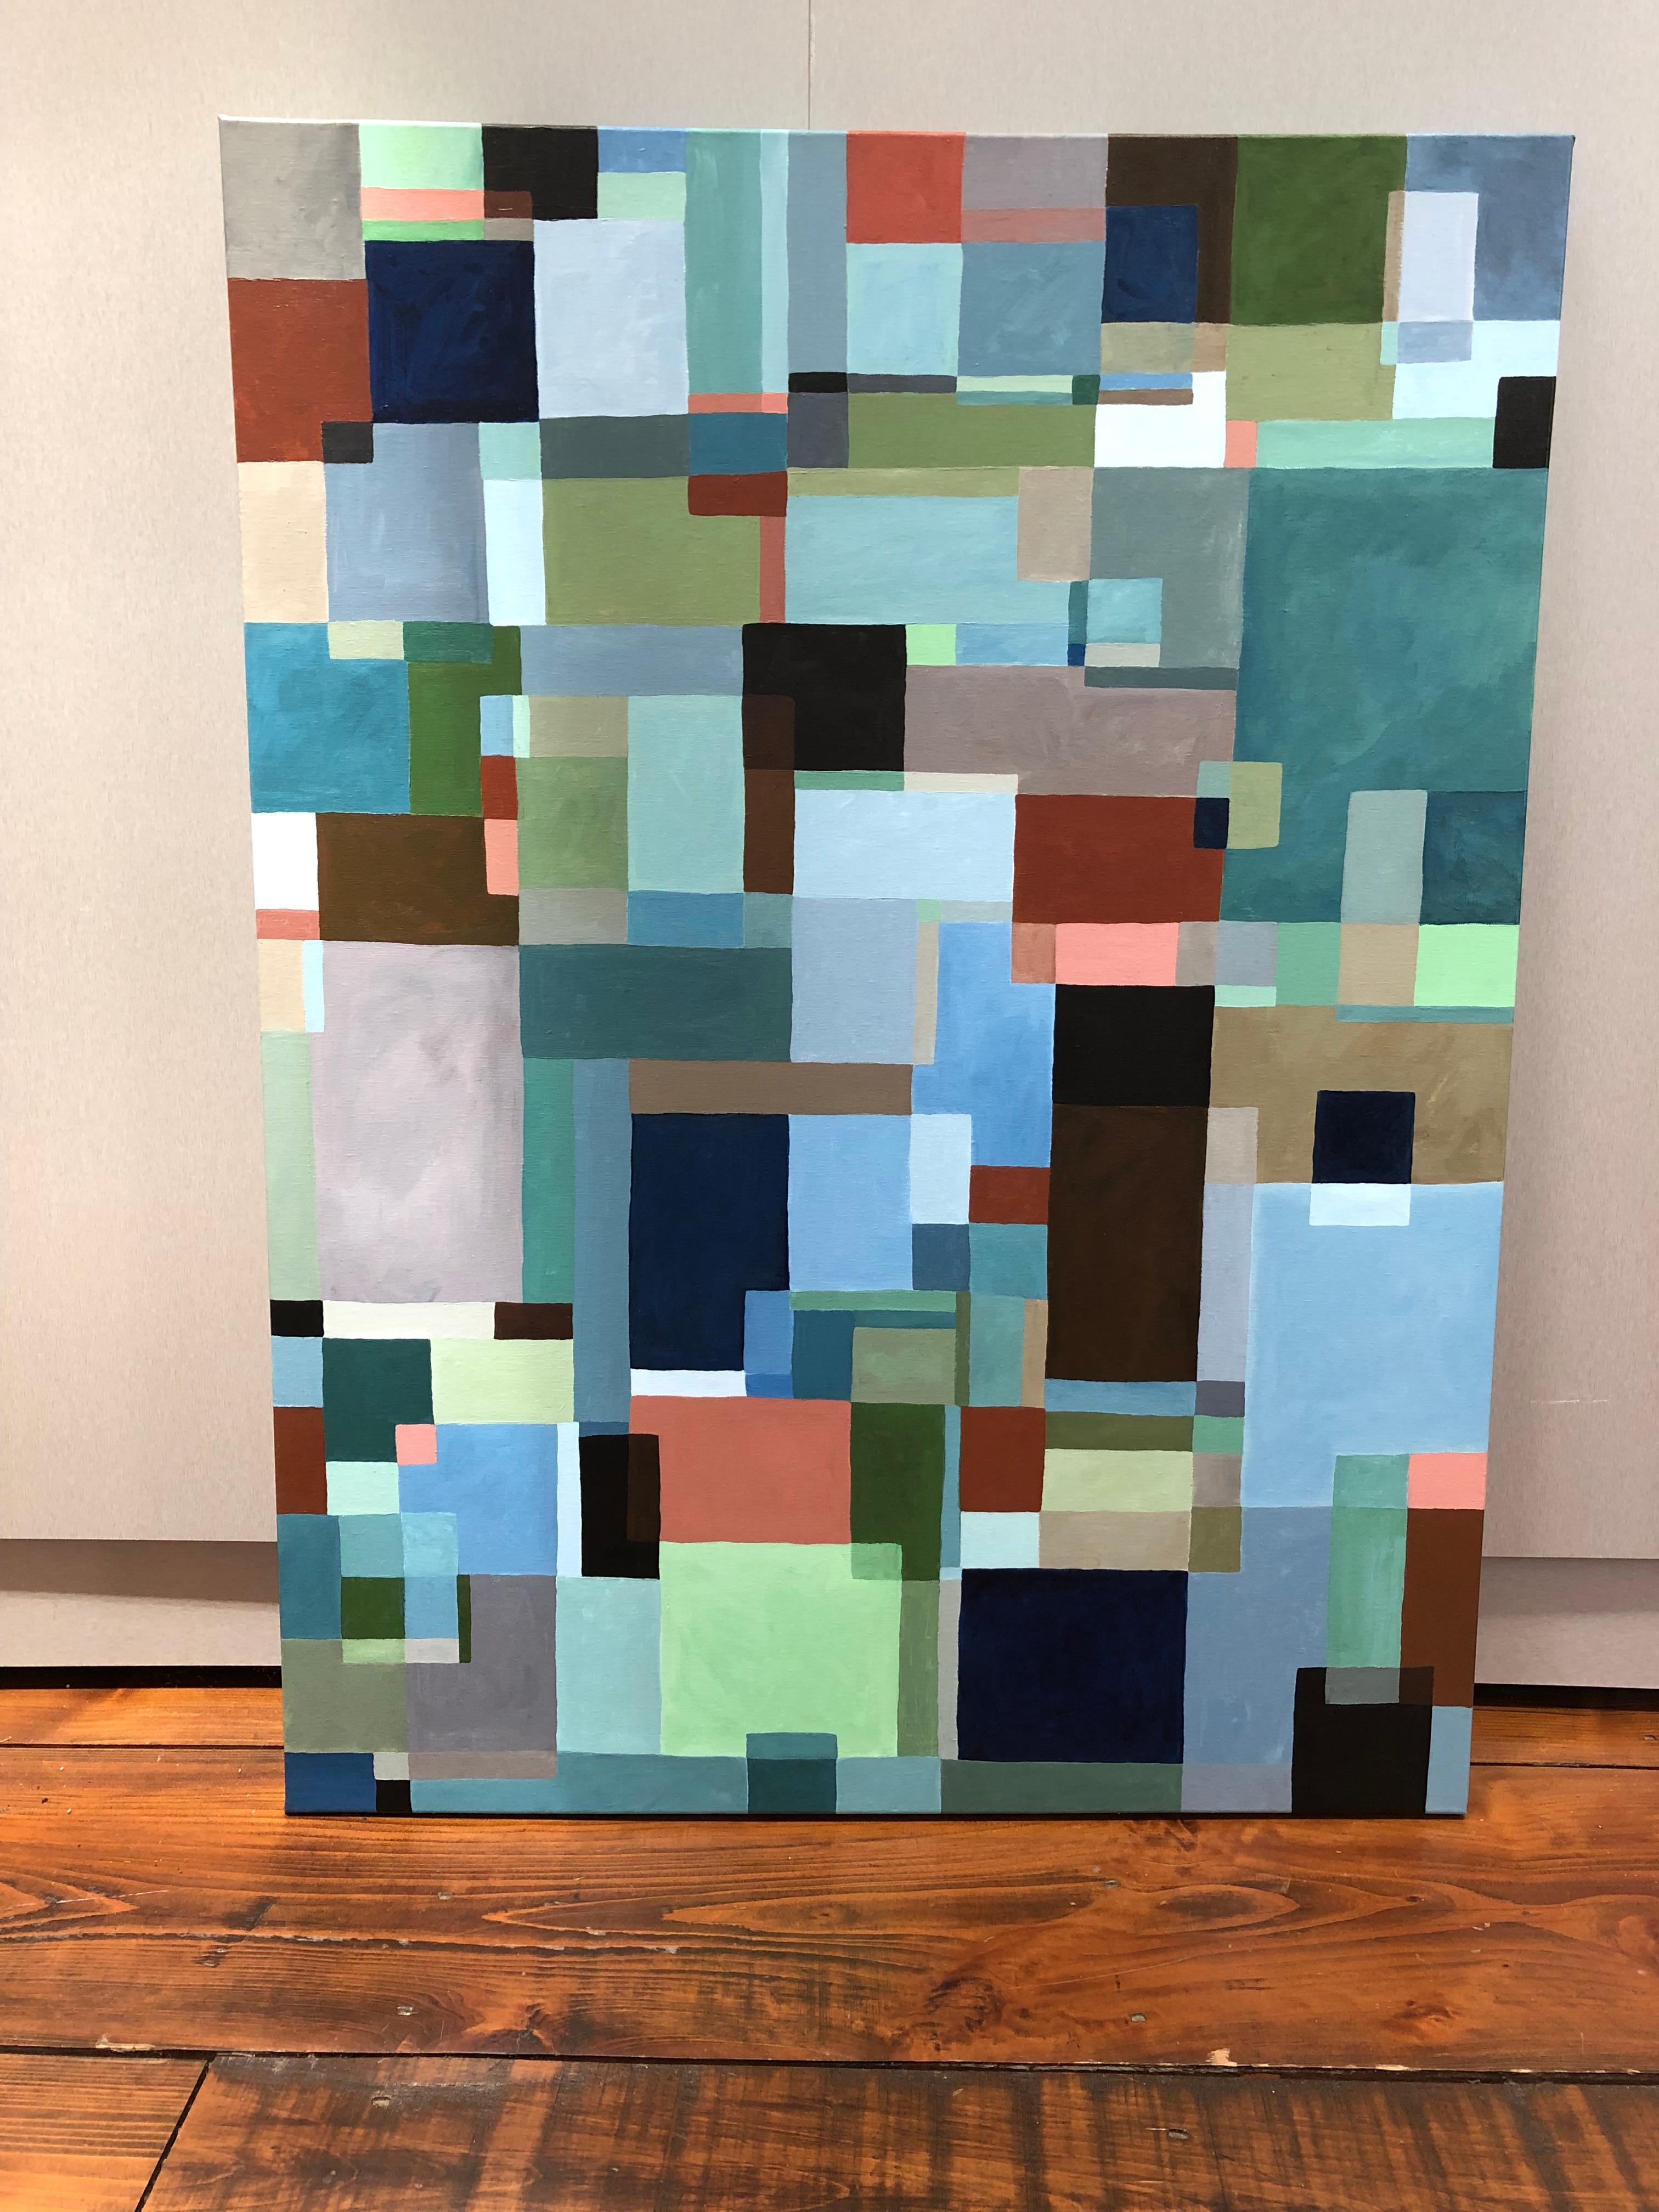 Striking large abstract painting with multiple layers of rectangles that overlap and blend in a textural melodic interplay. Colors are muted and earthy with brown, navy, black, celadon, light prussian blue and various shades with hookers green.
Can